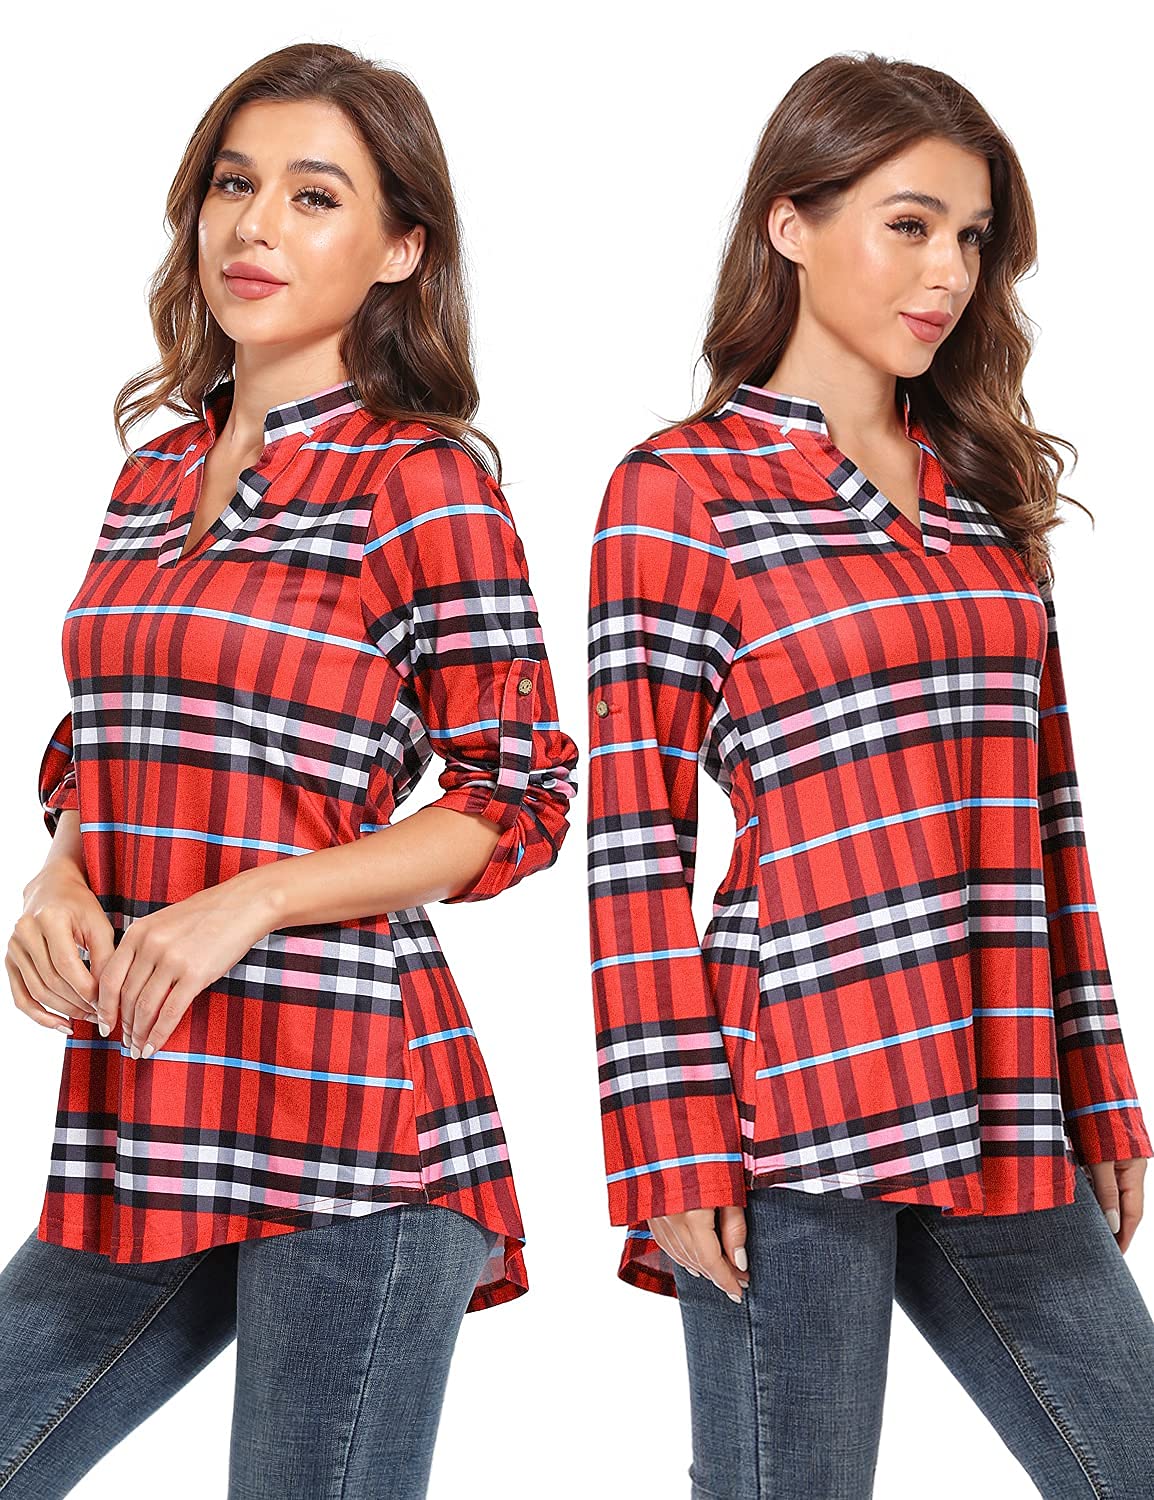 SeSe Code Womens 3/4 Roll Sleeve Plaid Shirt Business Casual Blouses and Tops Dressy for Work